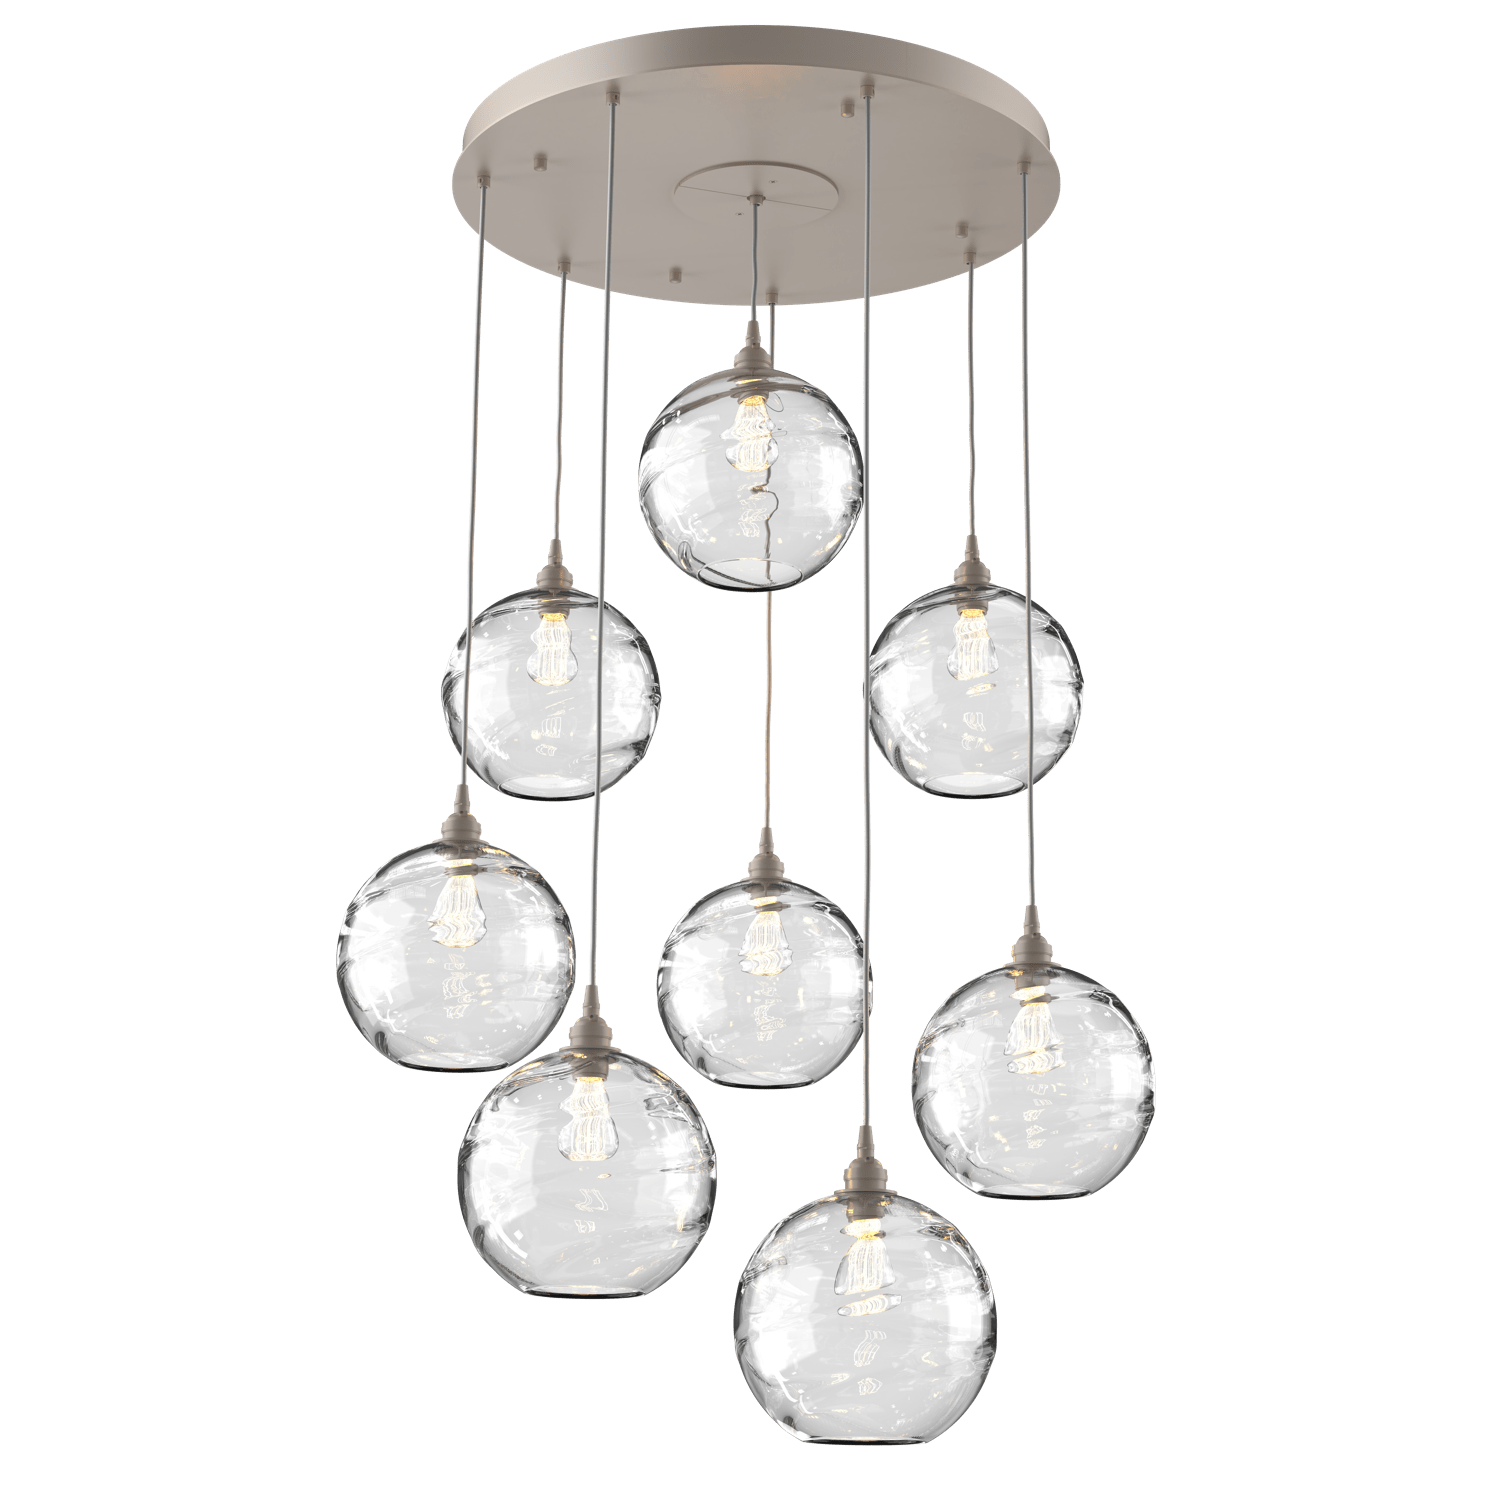 CHB0047-08-BS-OC-Hammerton-Studio-Optic-Blown-Glass-Terra-8-light-round-pendant-chandelier-with-metallic-beige-silver-finish-and-optic-clear-blown-glass-shades-and-incandescent-lamping